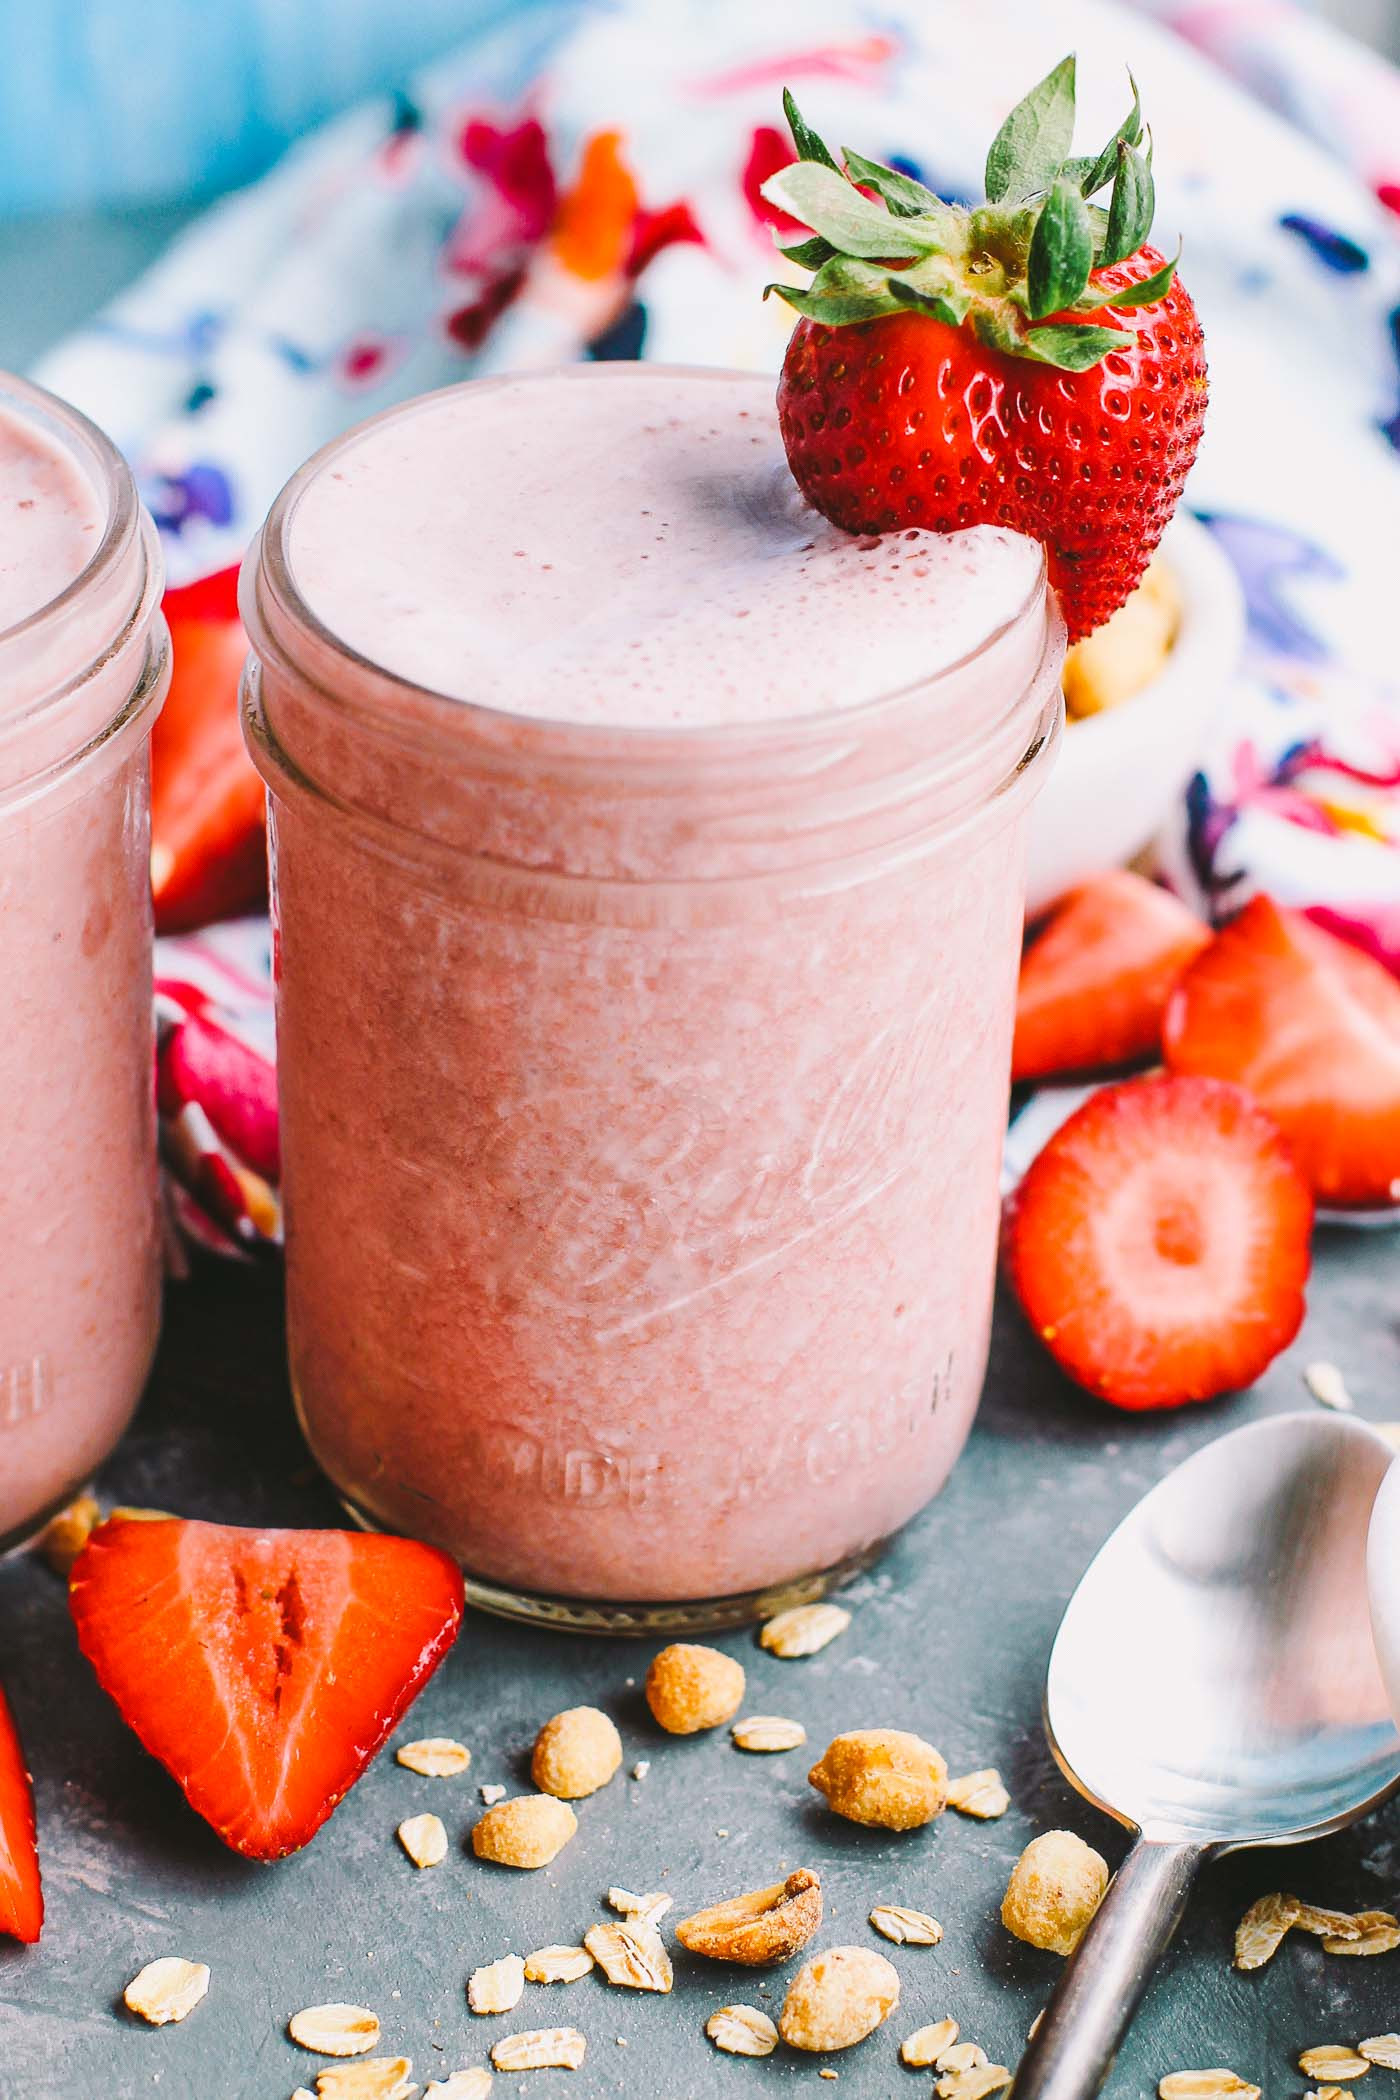 Breakfast Smoothie Recipes
 strawberry pb&j protein smoothies plays well with butter